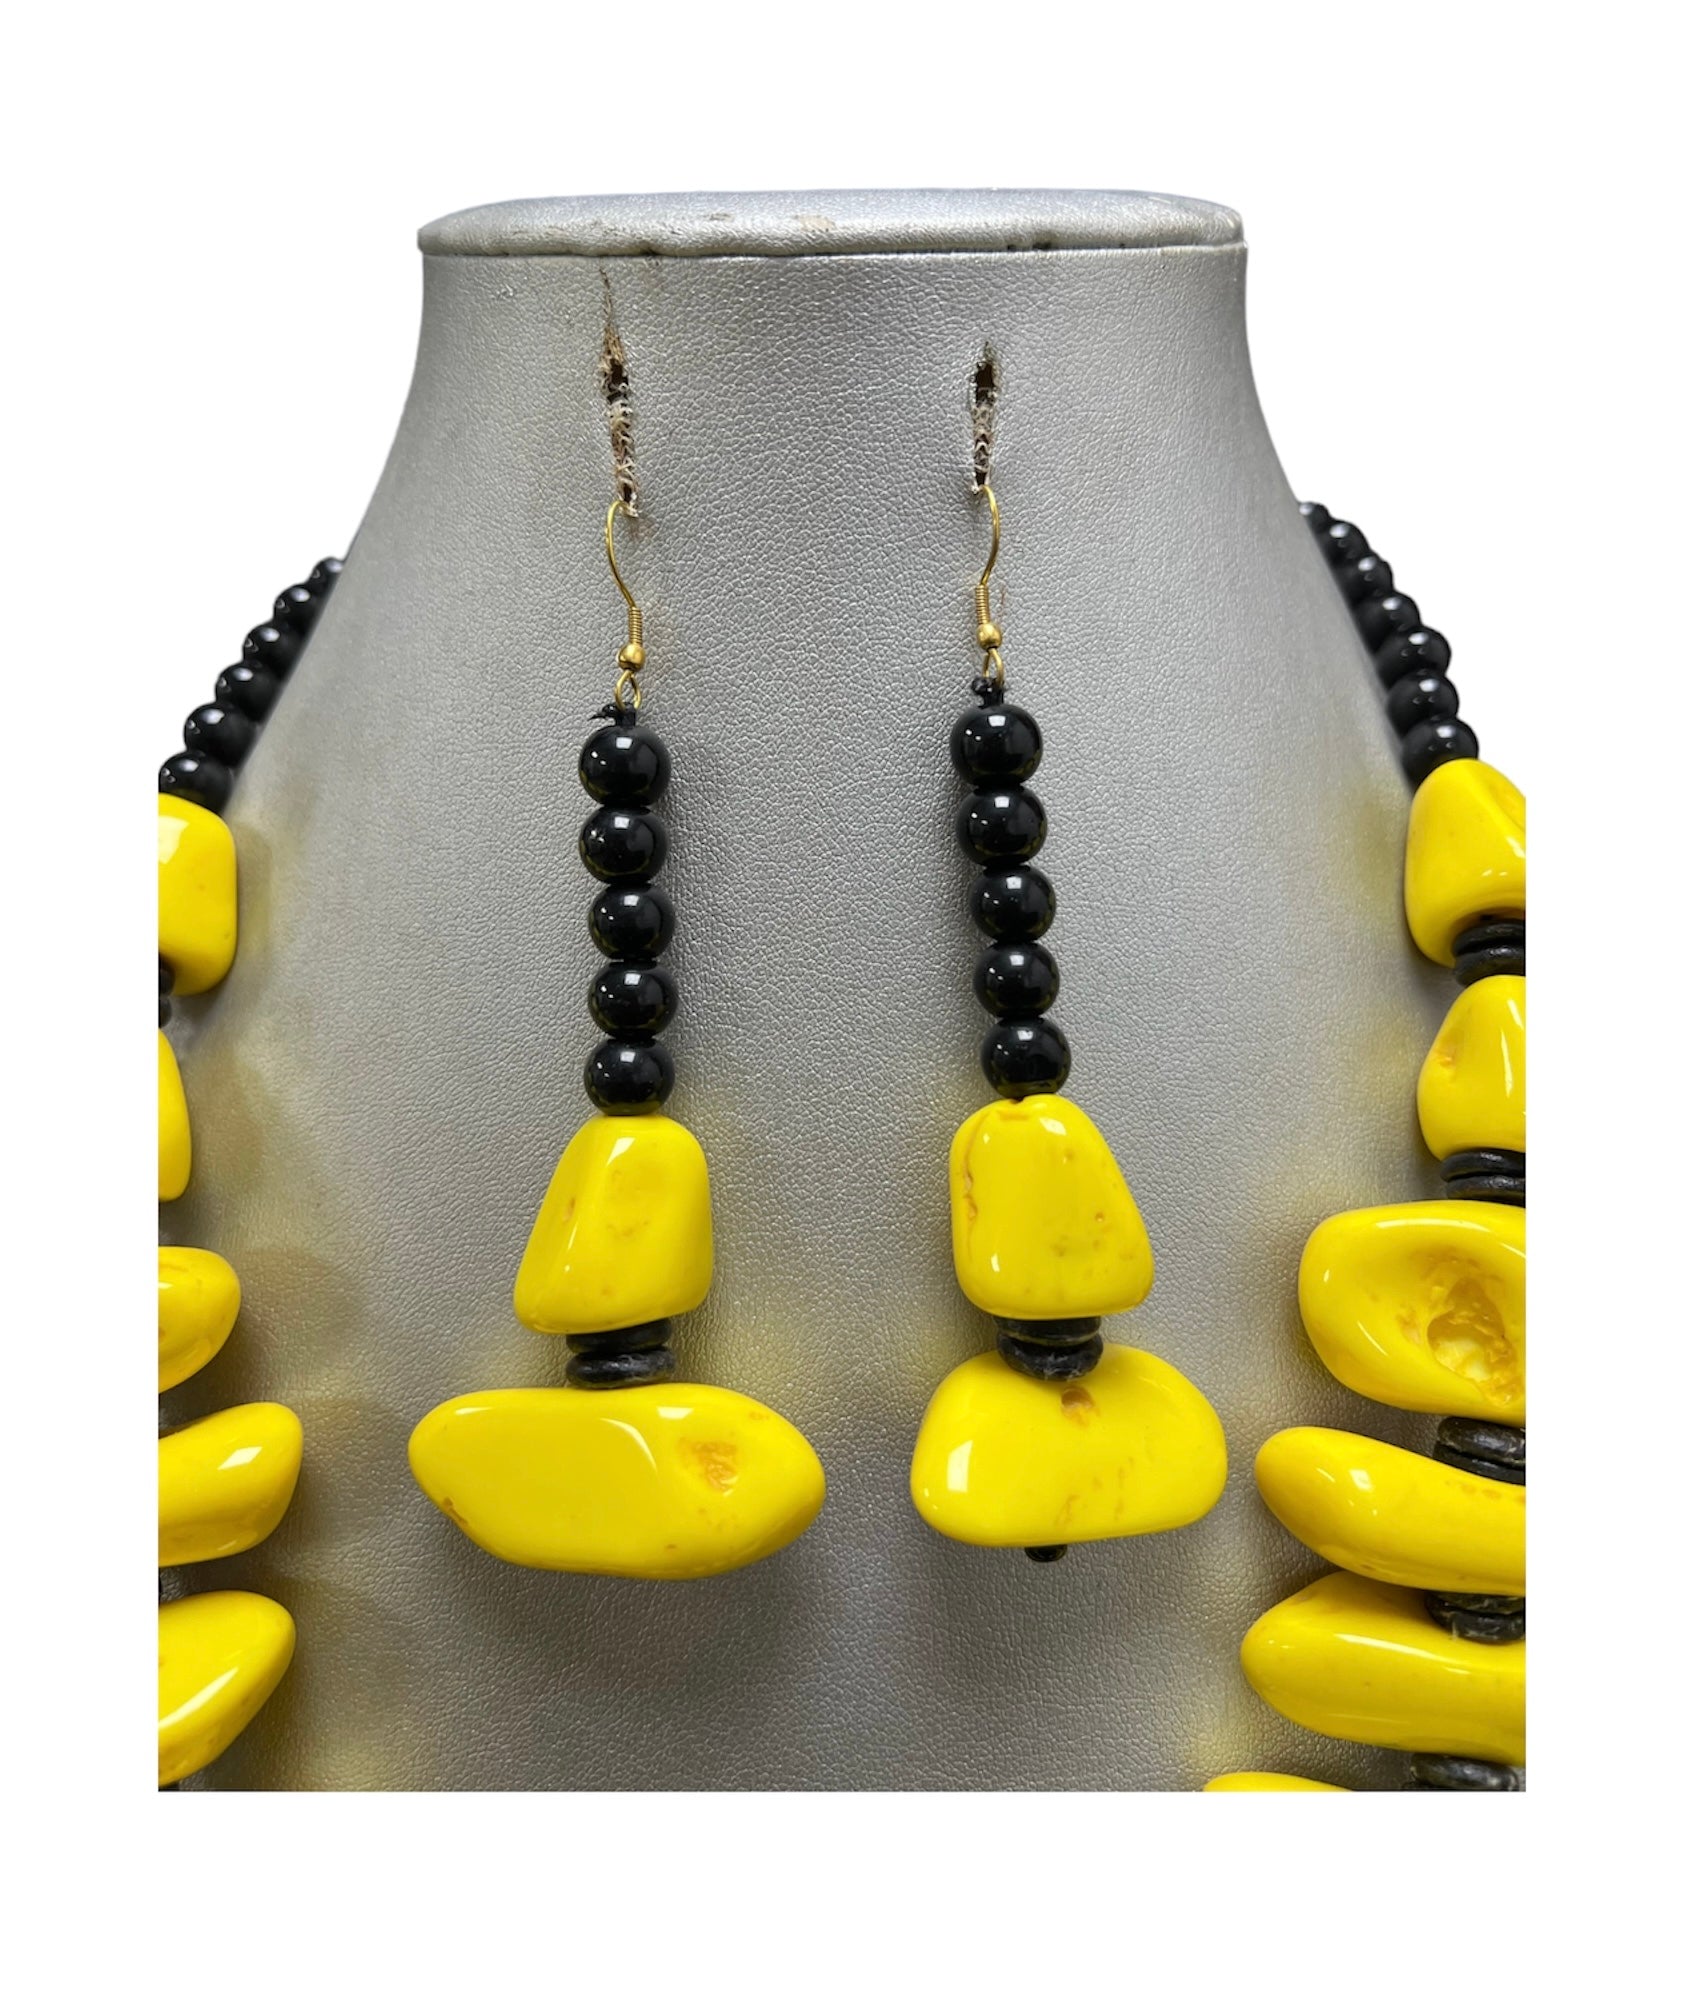 Women's African Solid Color Beaded Necklace Set -- Jewelry 53